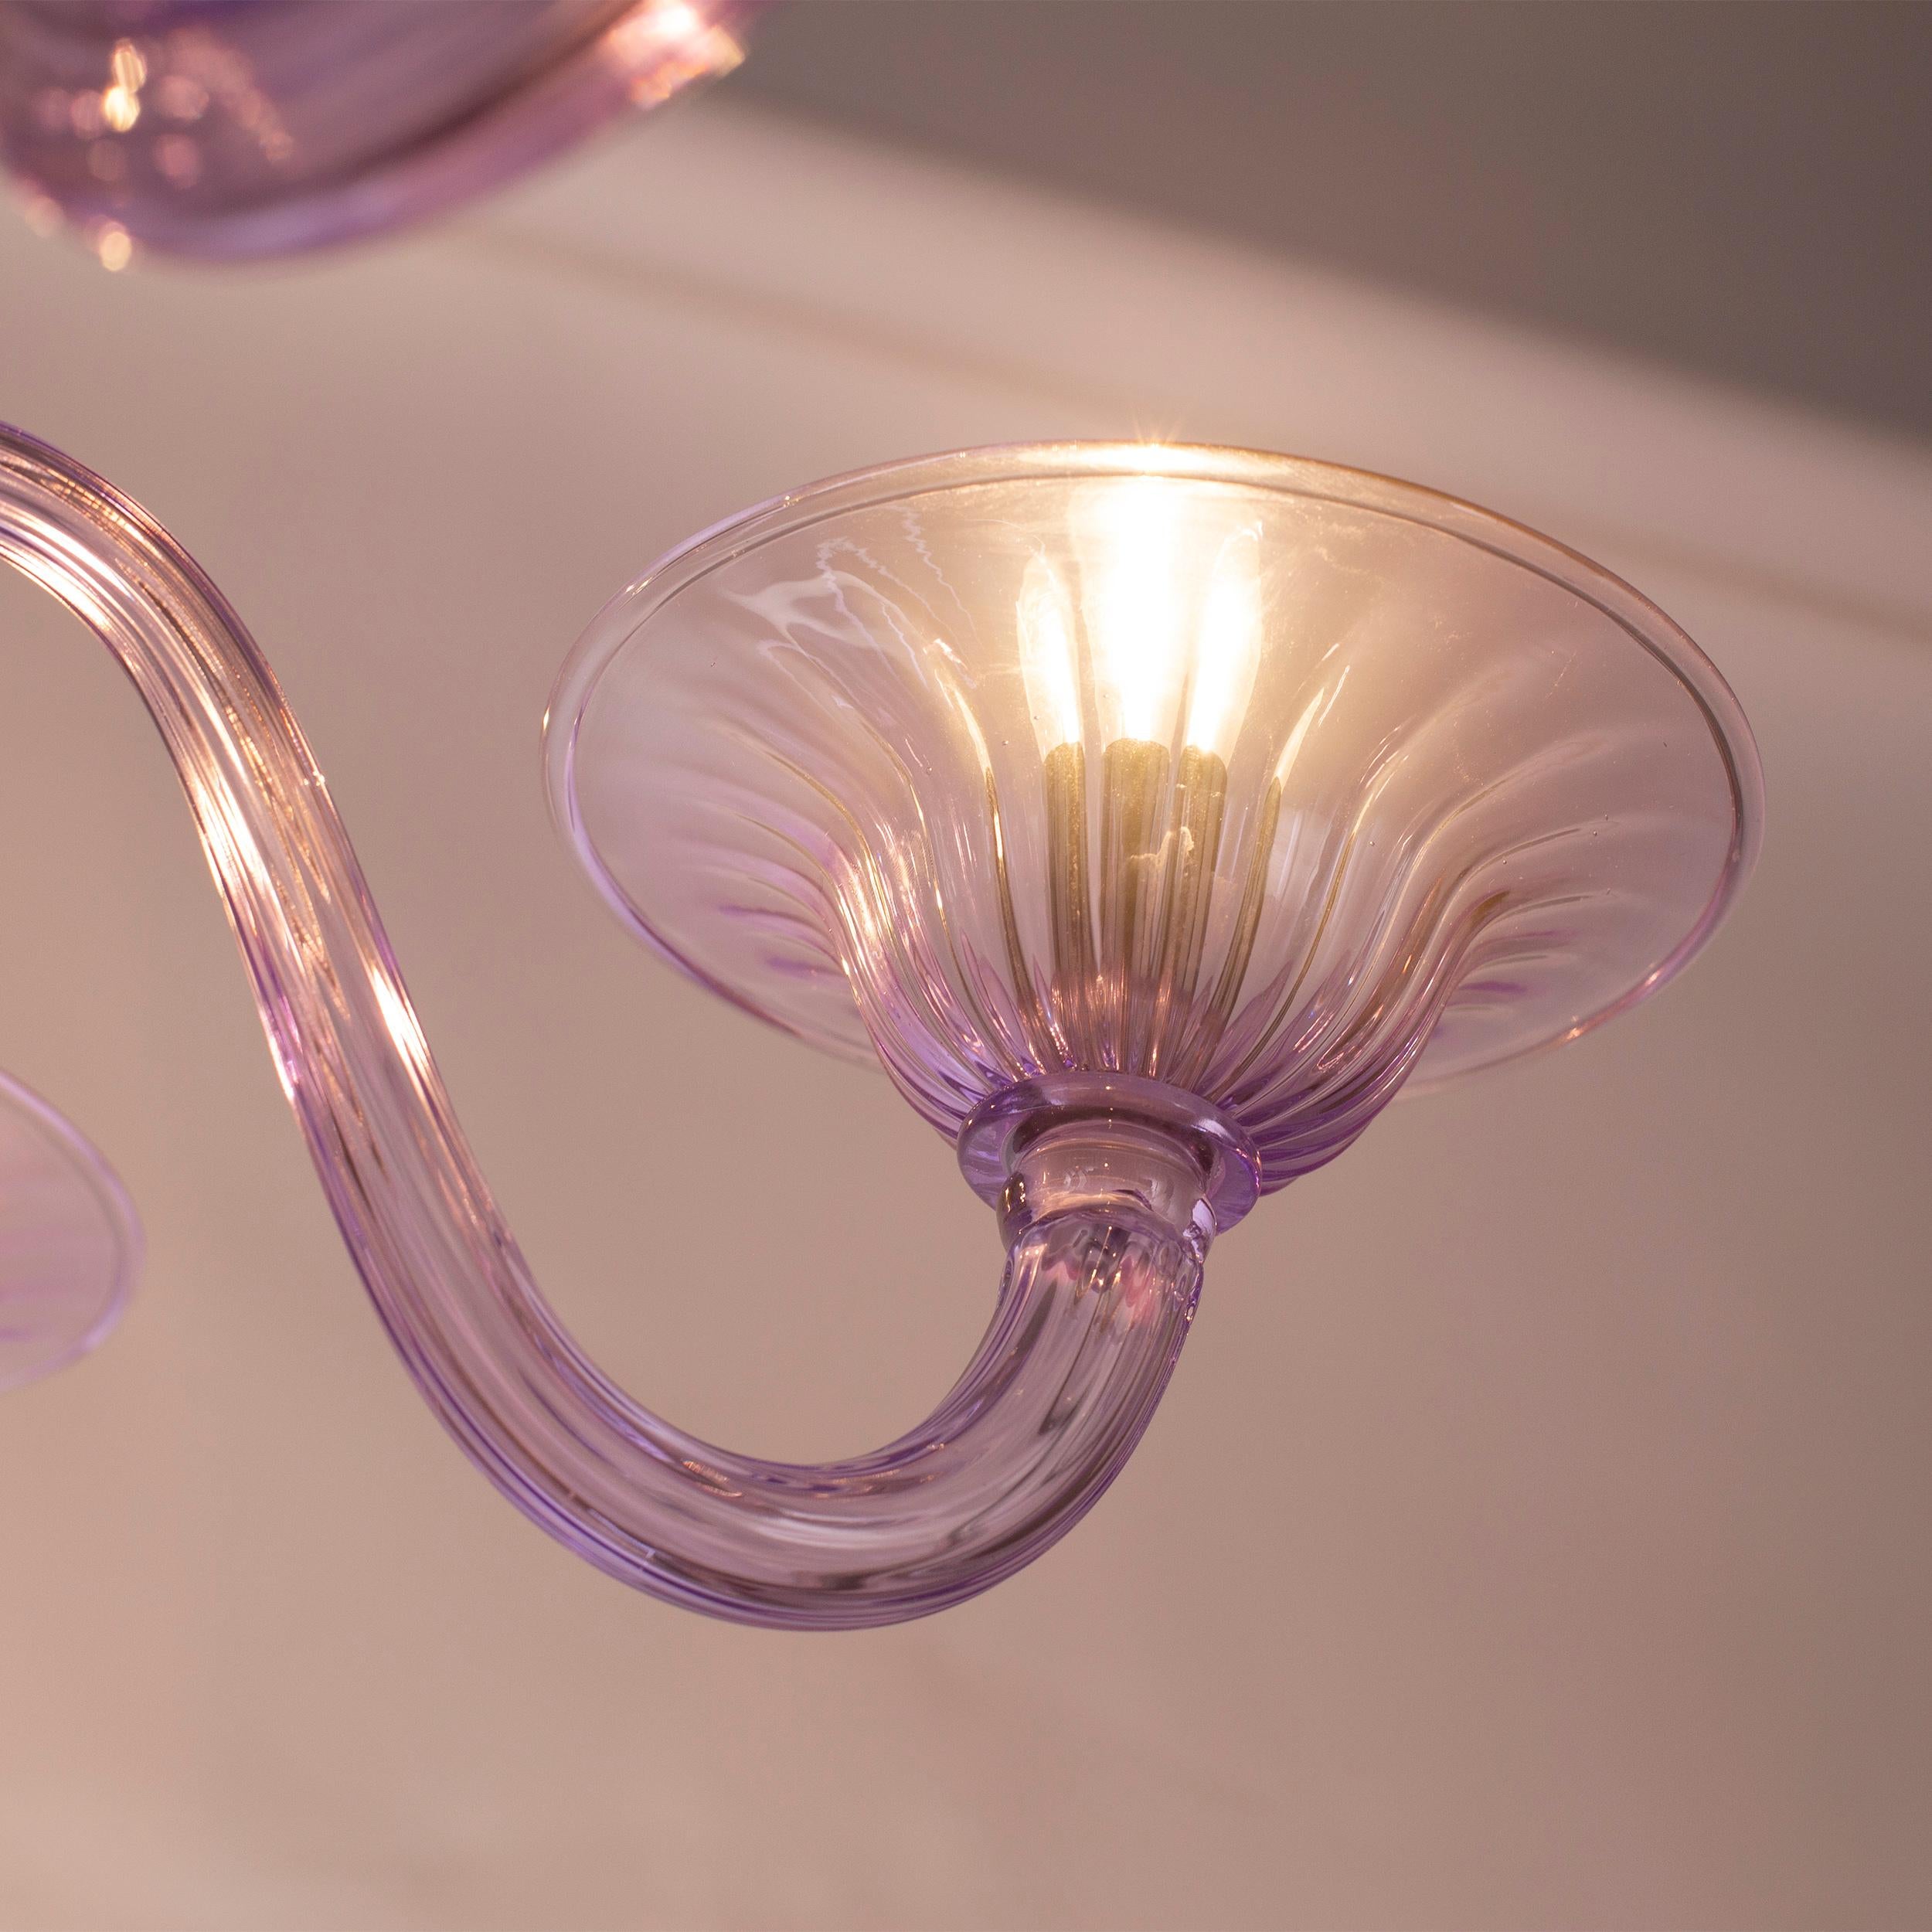 Simplicissimus Chandelier, 6 Arms lilac Murano Glass by Multiforme For Sale 3